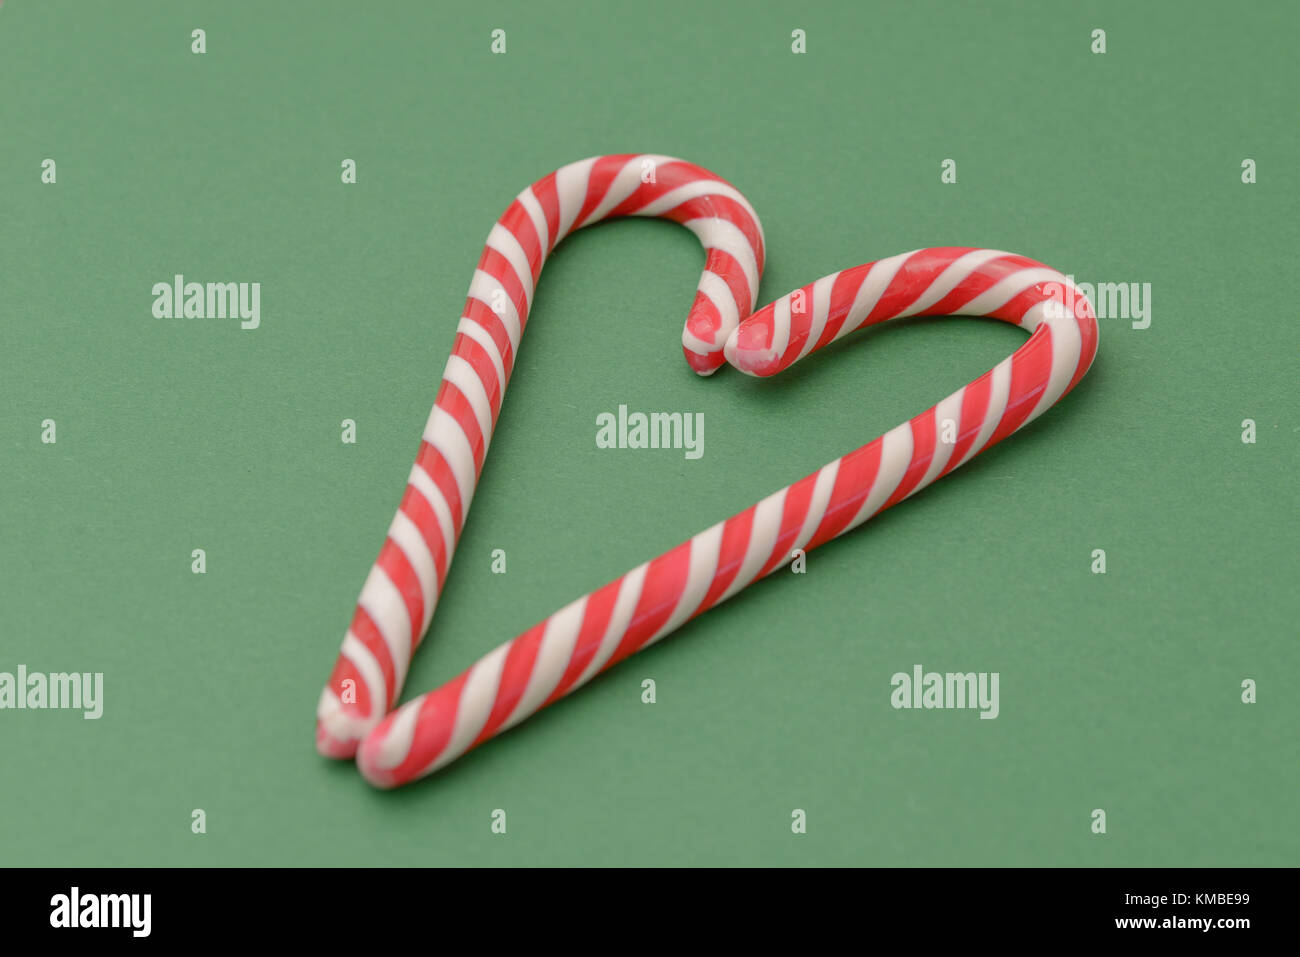 Sugar Candy Sticks Red and white Stock Photo - Alamy